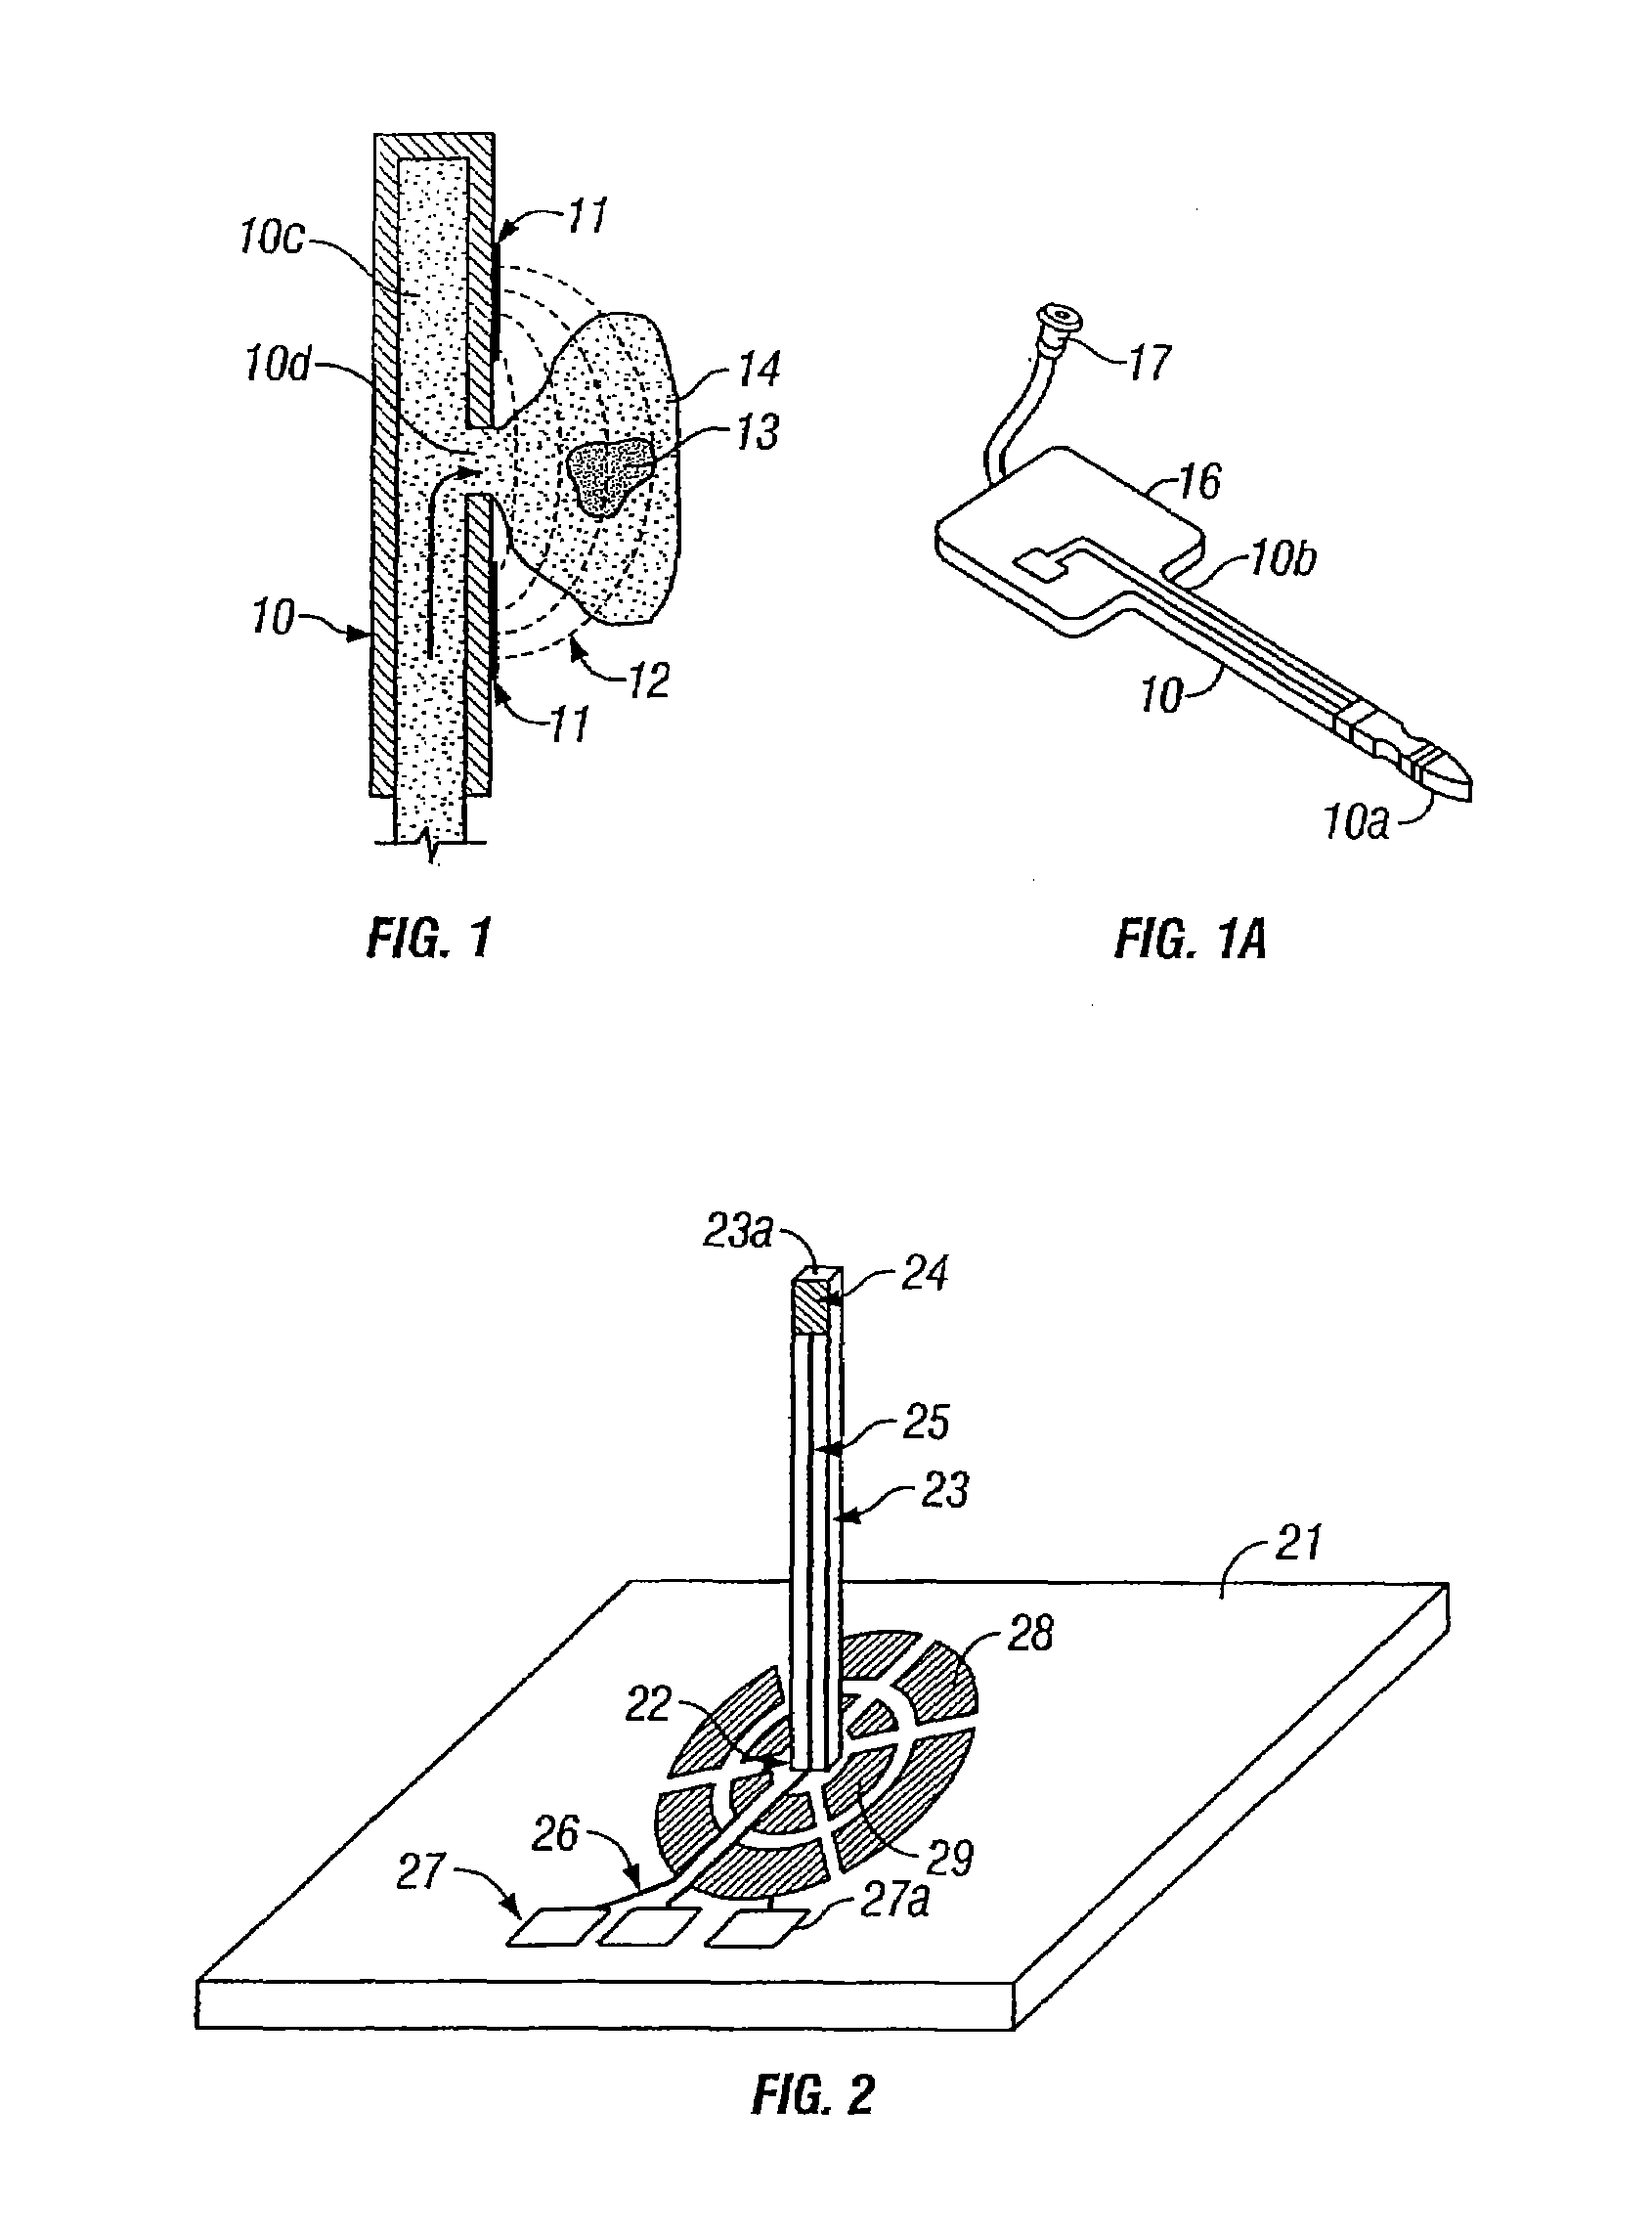 Electroporation microneedle and methods for its use